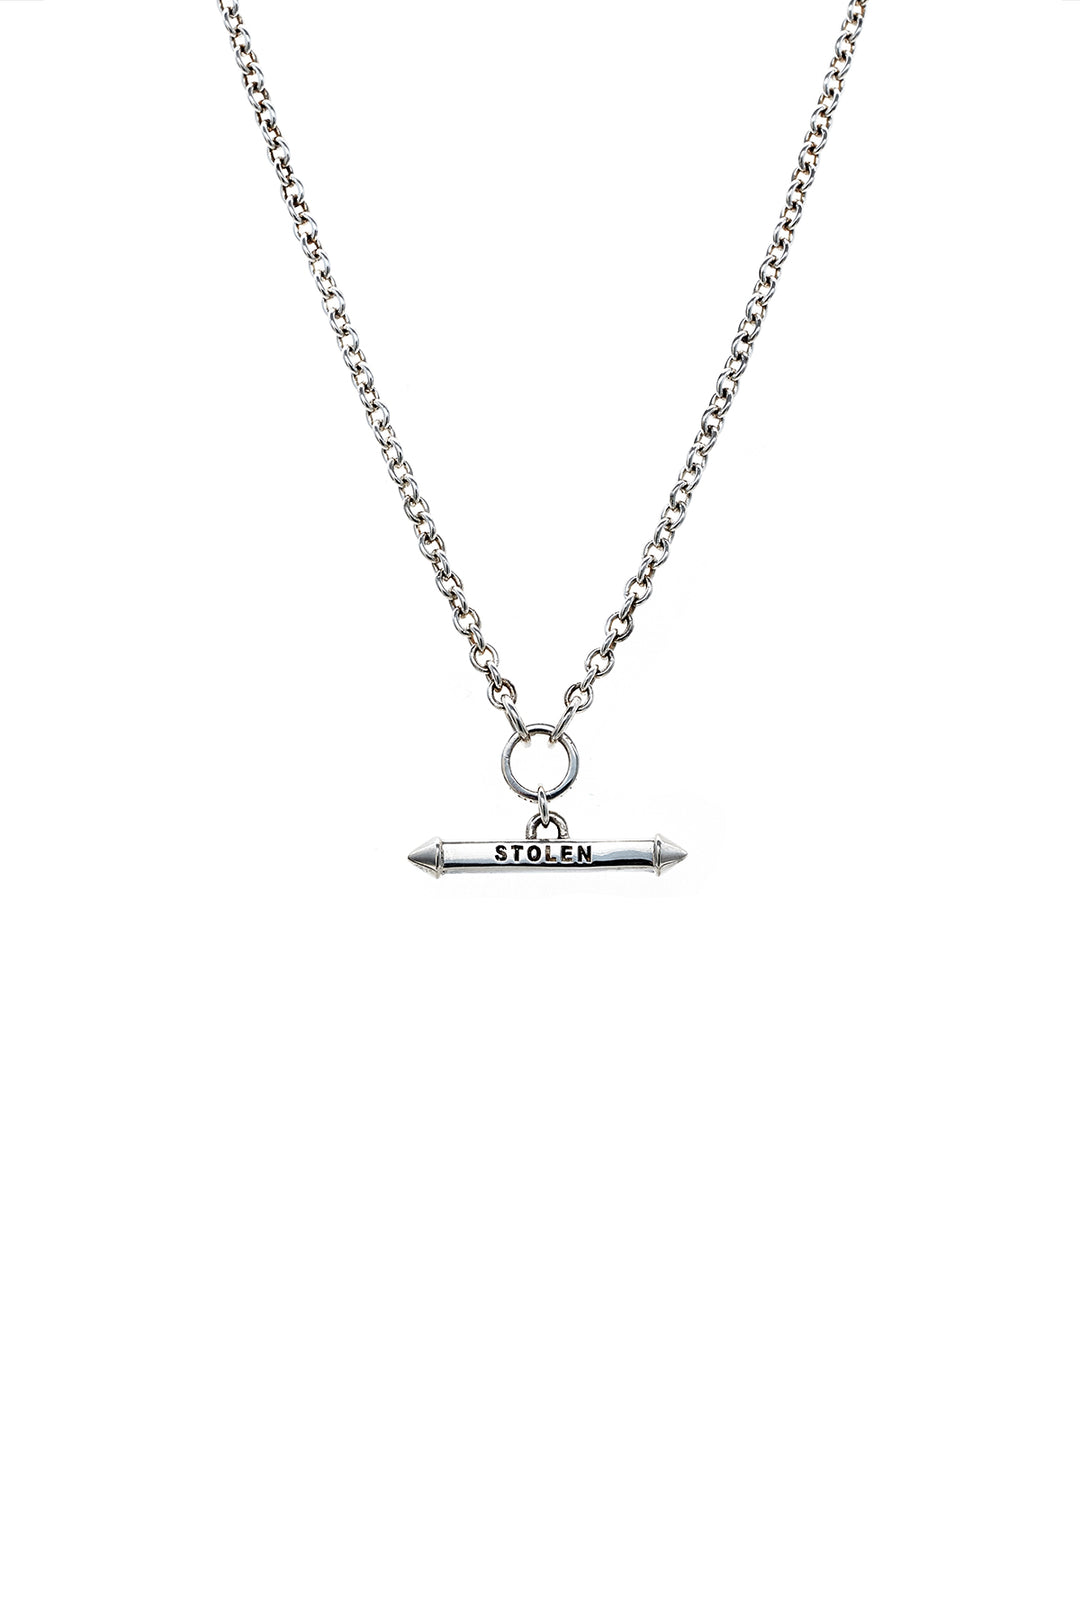 Stolen Girlfriends Club Stake Fob Necklace